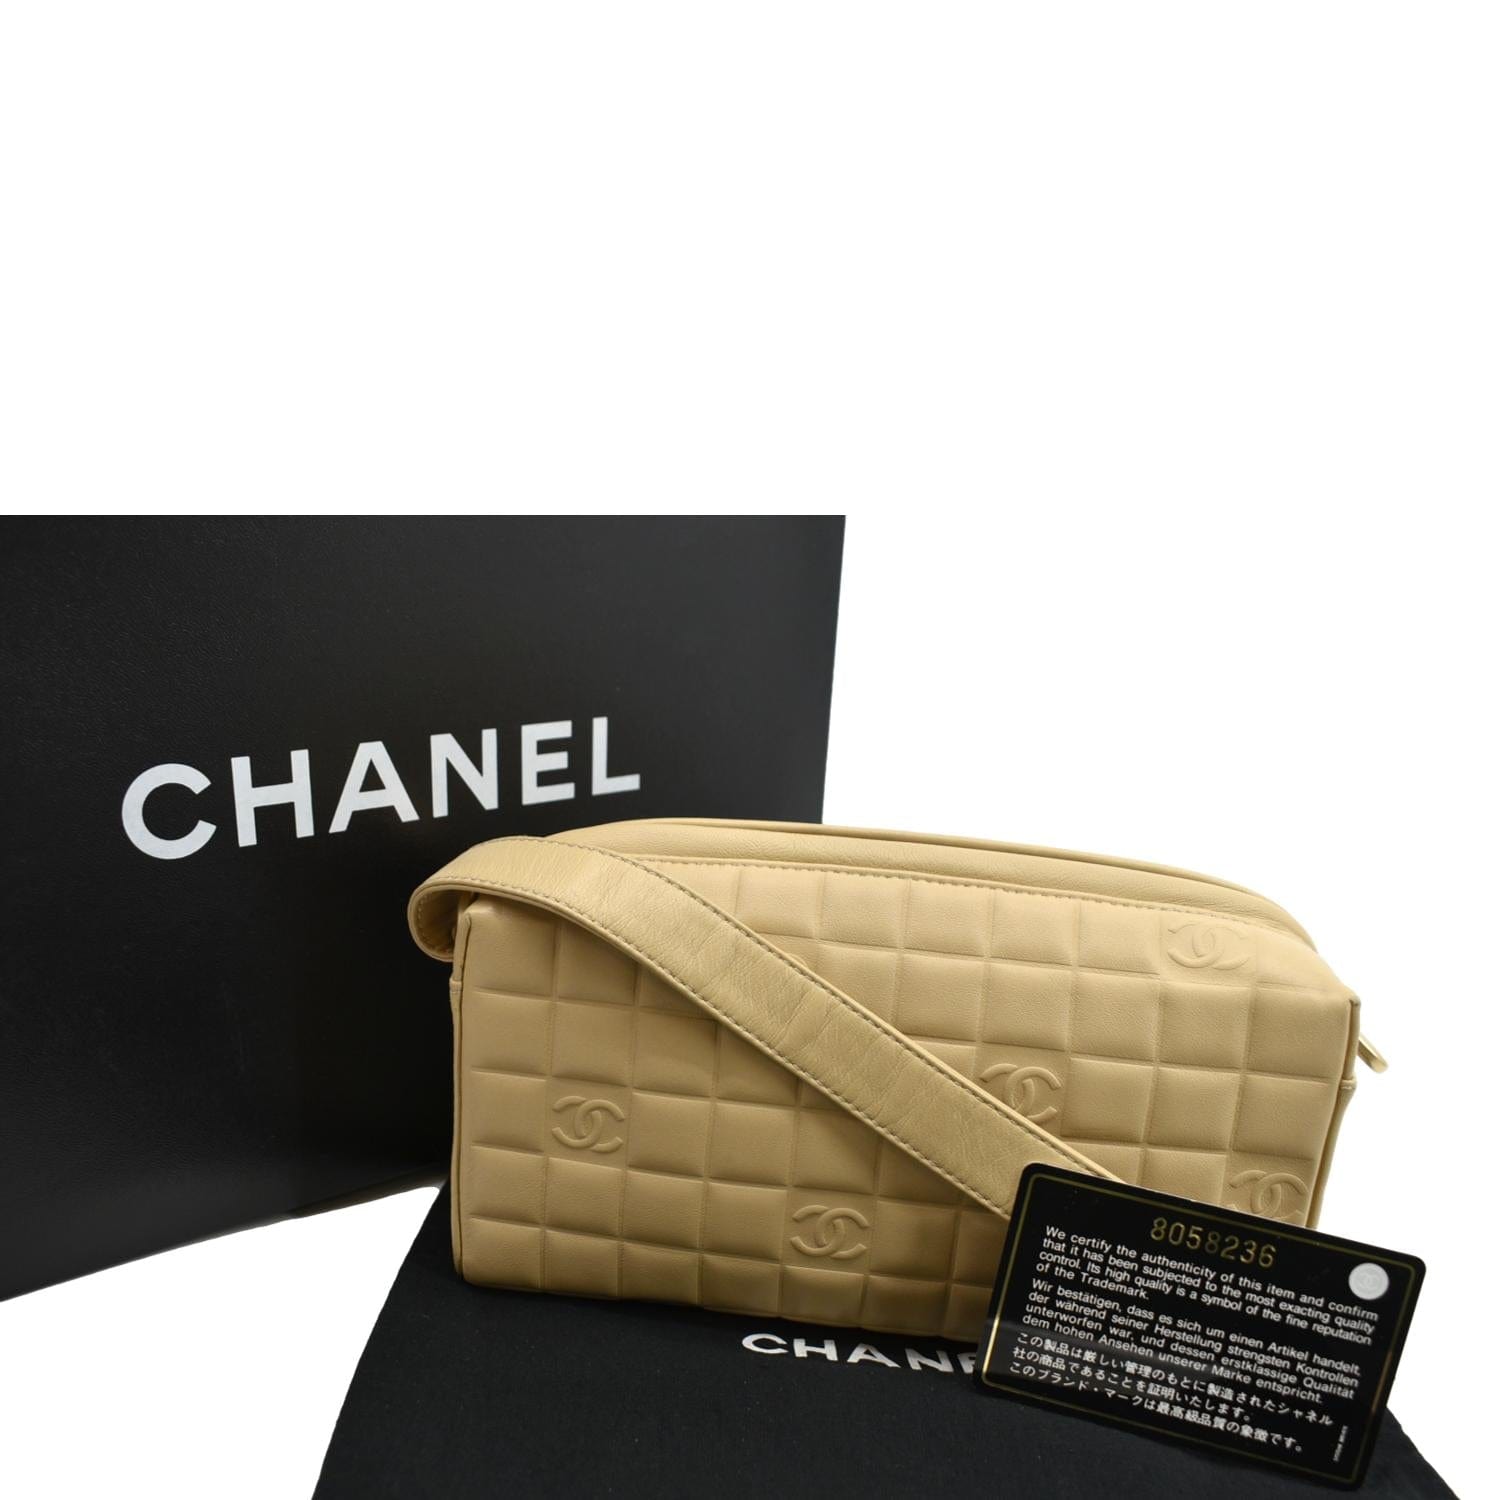 Chanel Quilted Chocolate Bar Shoulder Bag - Authenticity